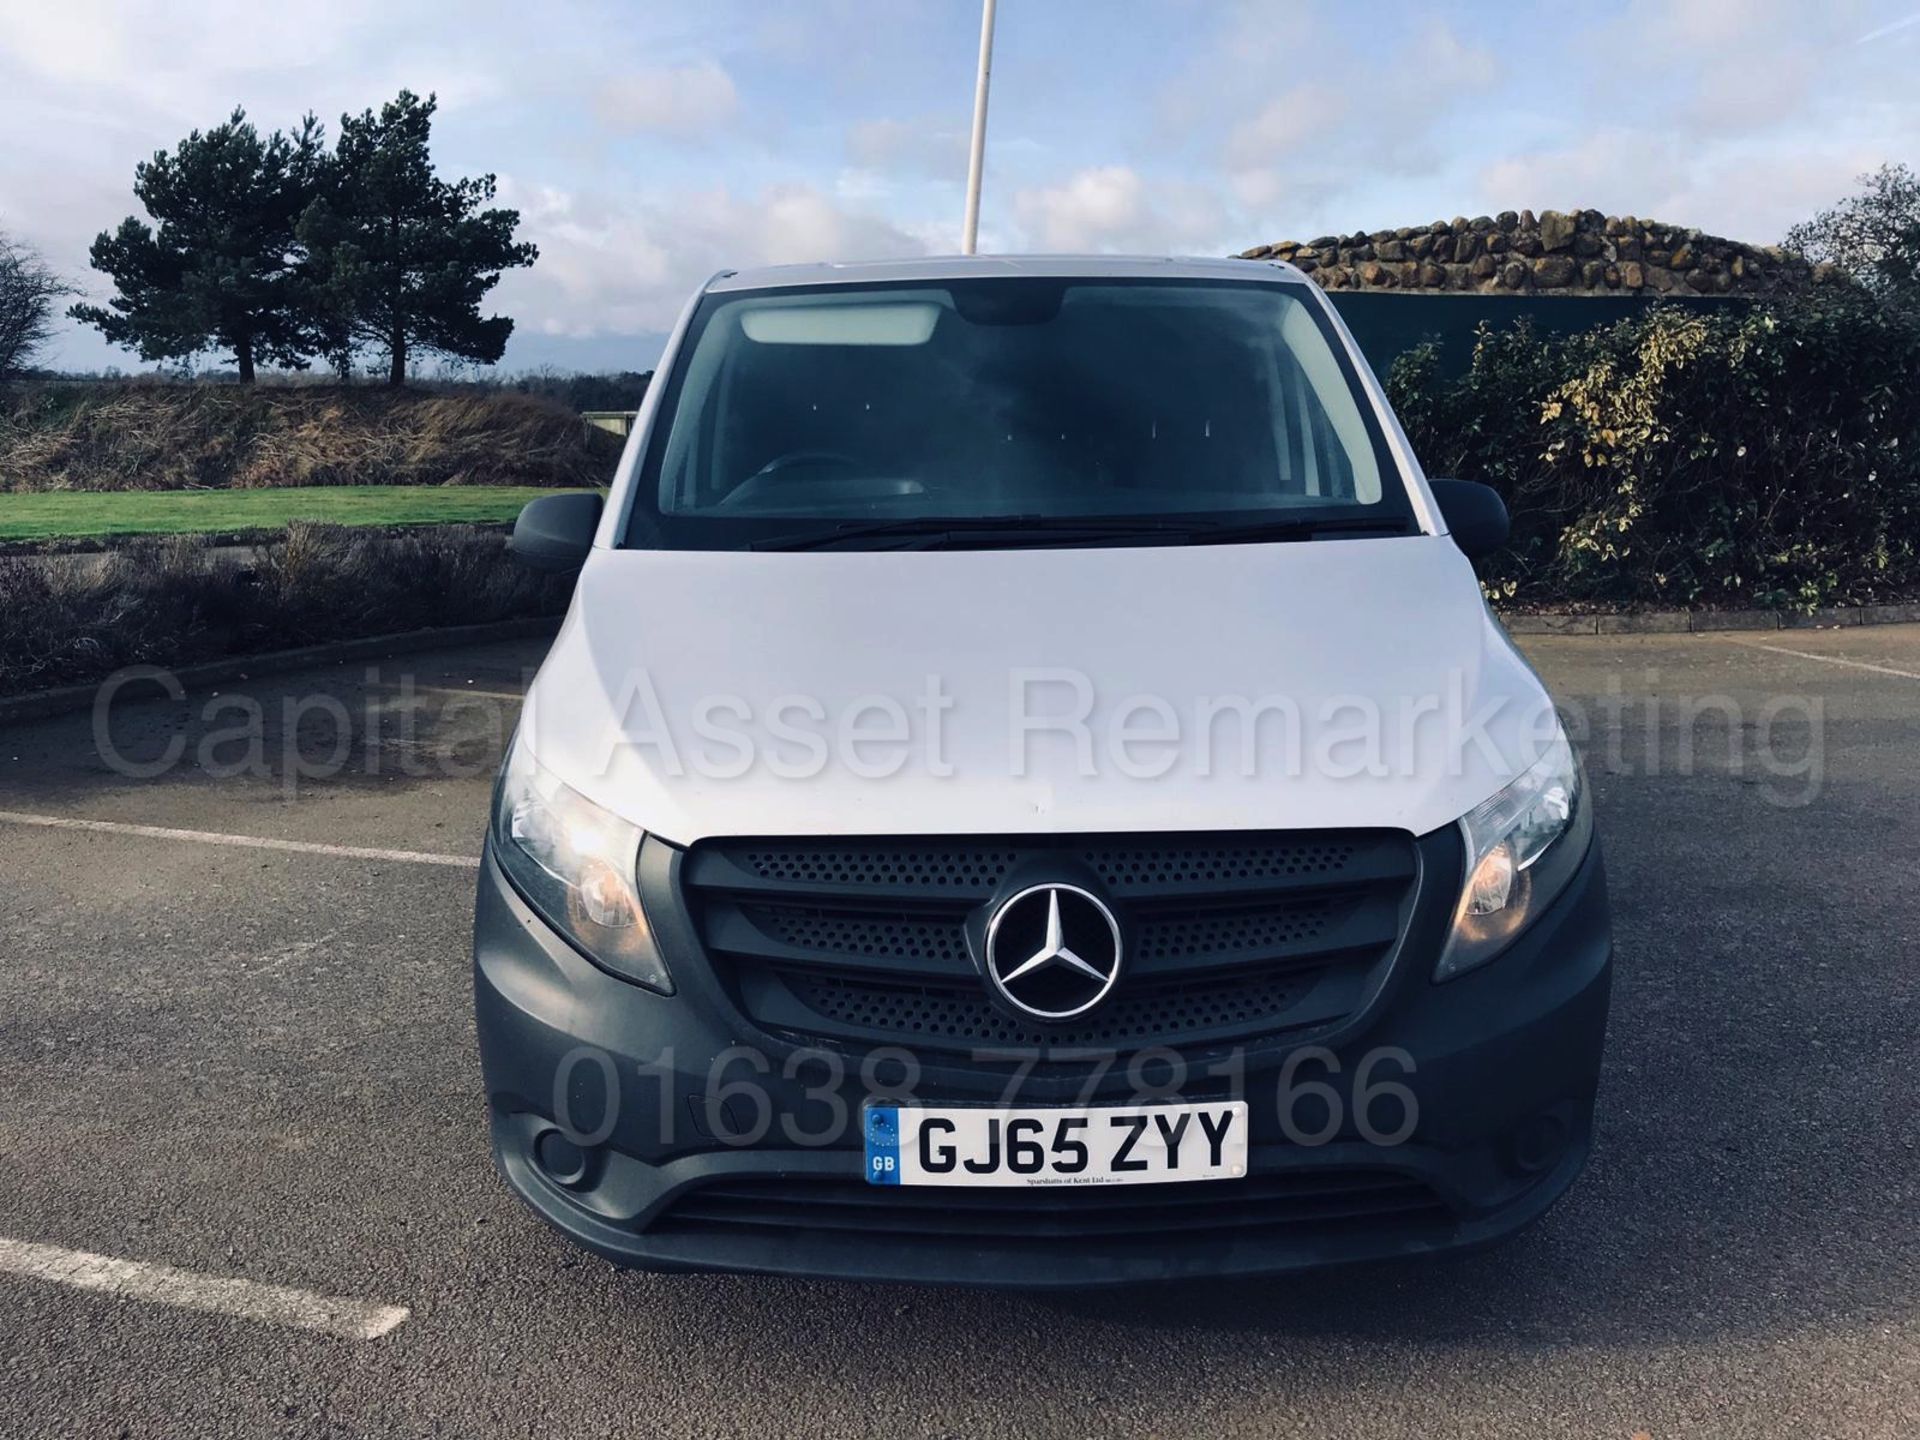 (ON SALE) MERCEDES VITO 116CDI BLUETEC (2016 MODEL) LWB - 1 OWNER - AIR CON - 163BHP - ELEC PACK - Image 3 of 17